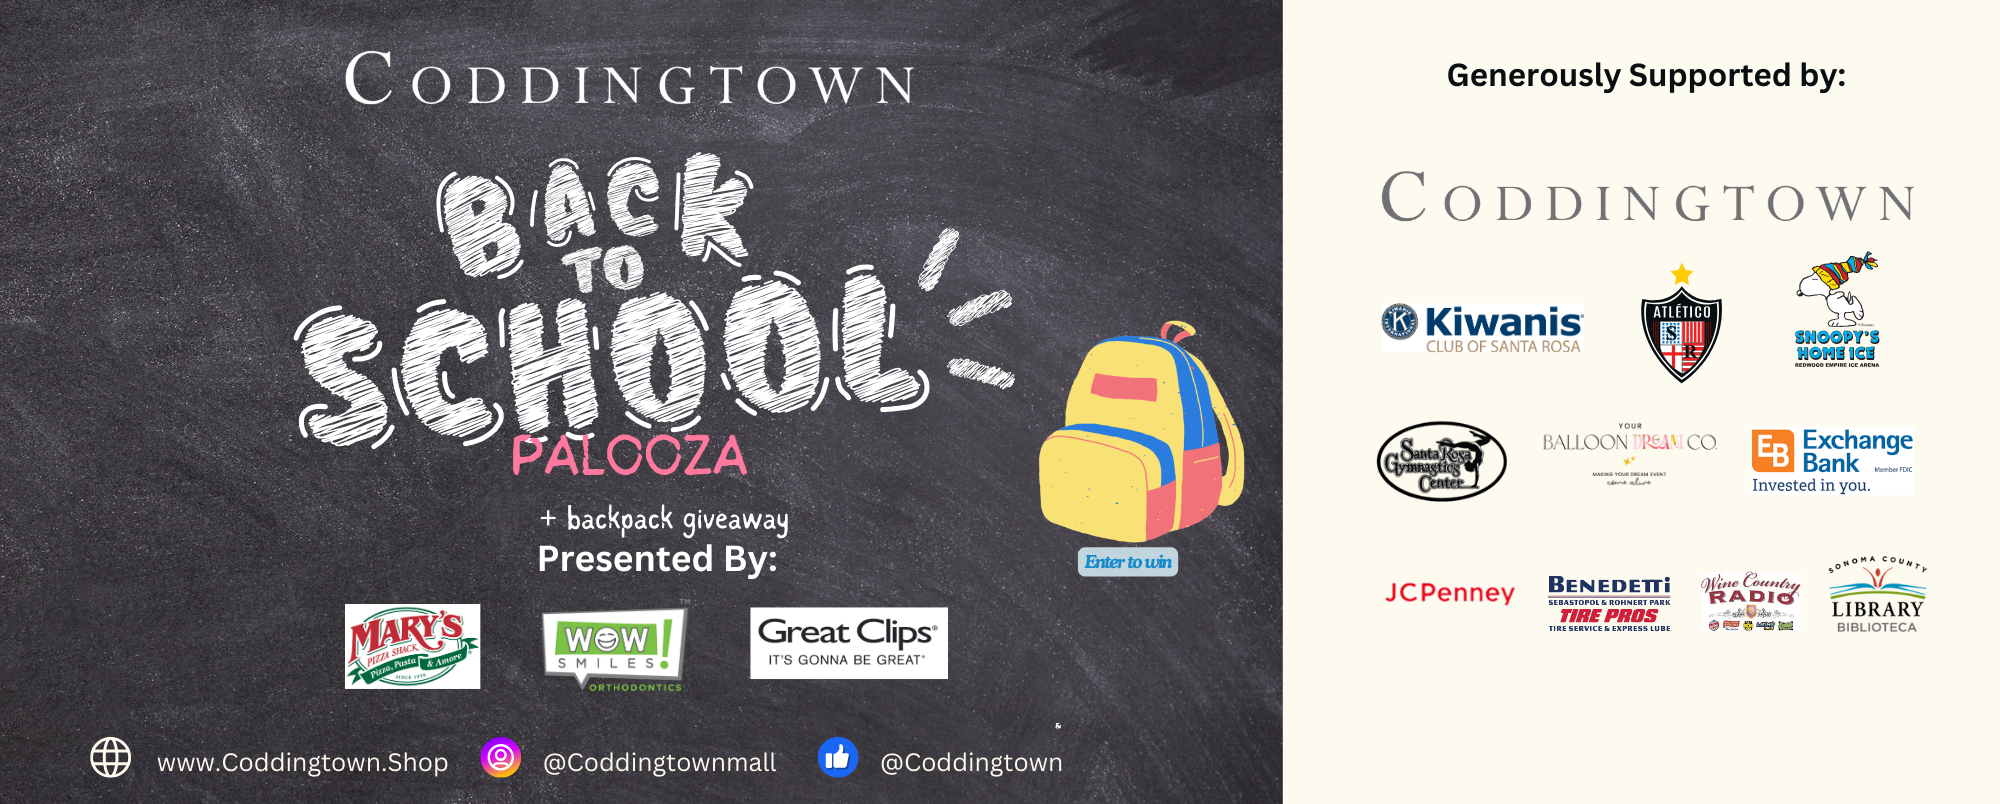 July 27th, Coddingtown is hosting a Back-To-School Palooza! Music, free school supplies, free Adidas backpacks, AMAZING giveaways, face painting and more!! All while supplies last. 11am-2pm. Must be present at event to enter in giveaways.